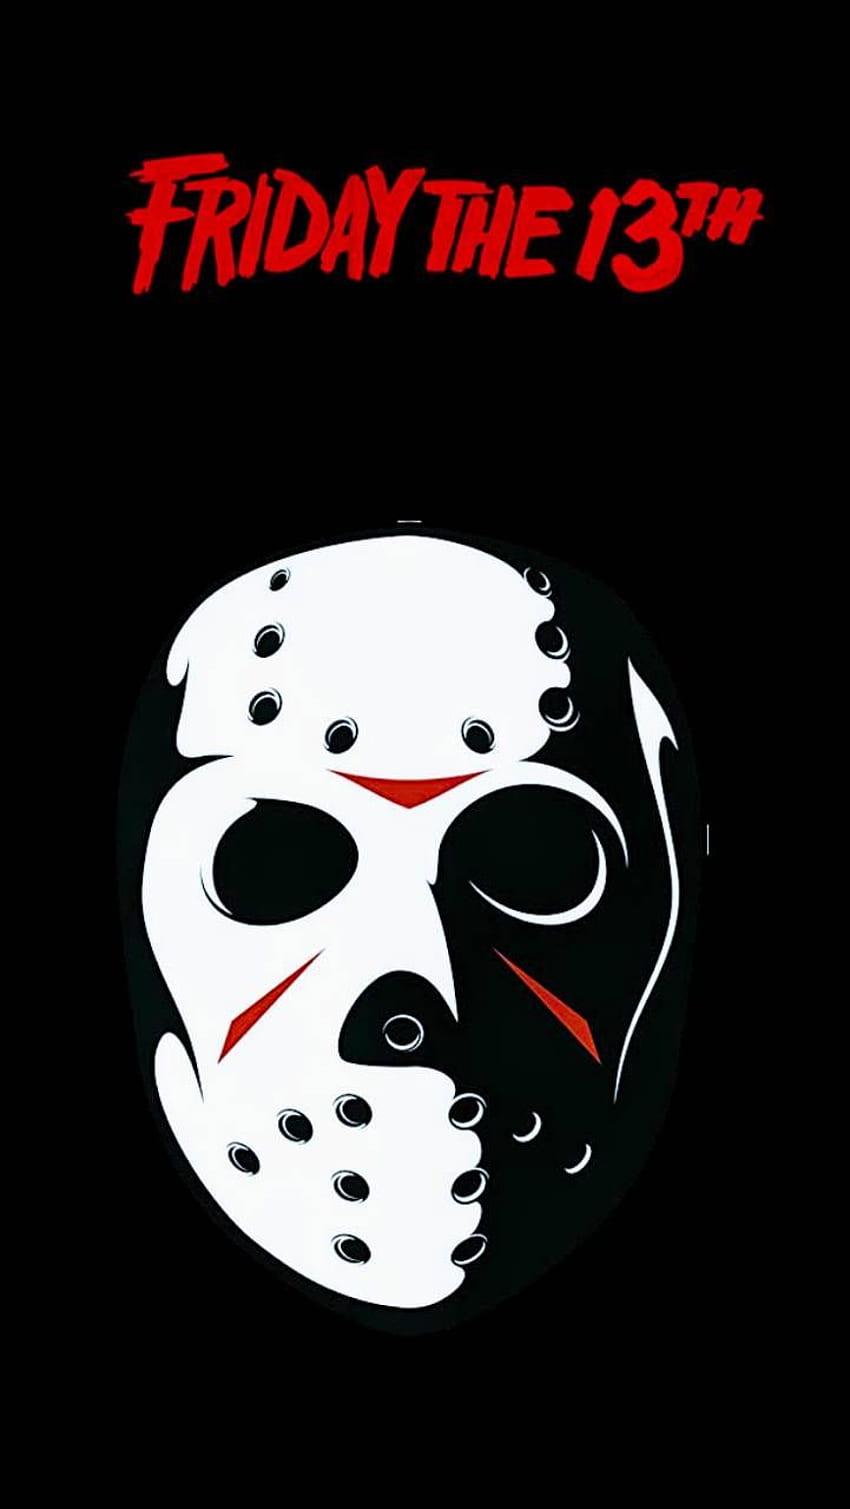 Friday The 13th Wallpaper Hd Background Friday The 13th Picture Background  Image And Wallpaper for Free Download